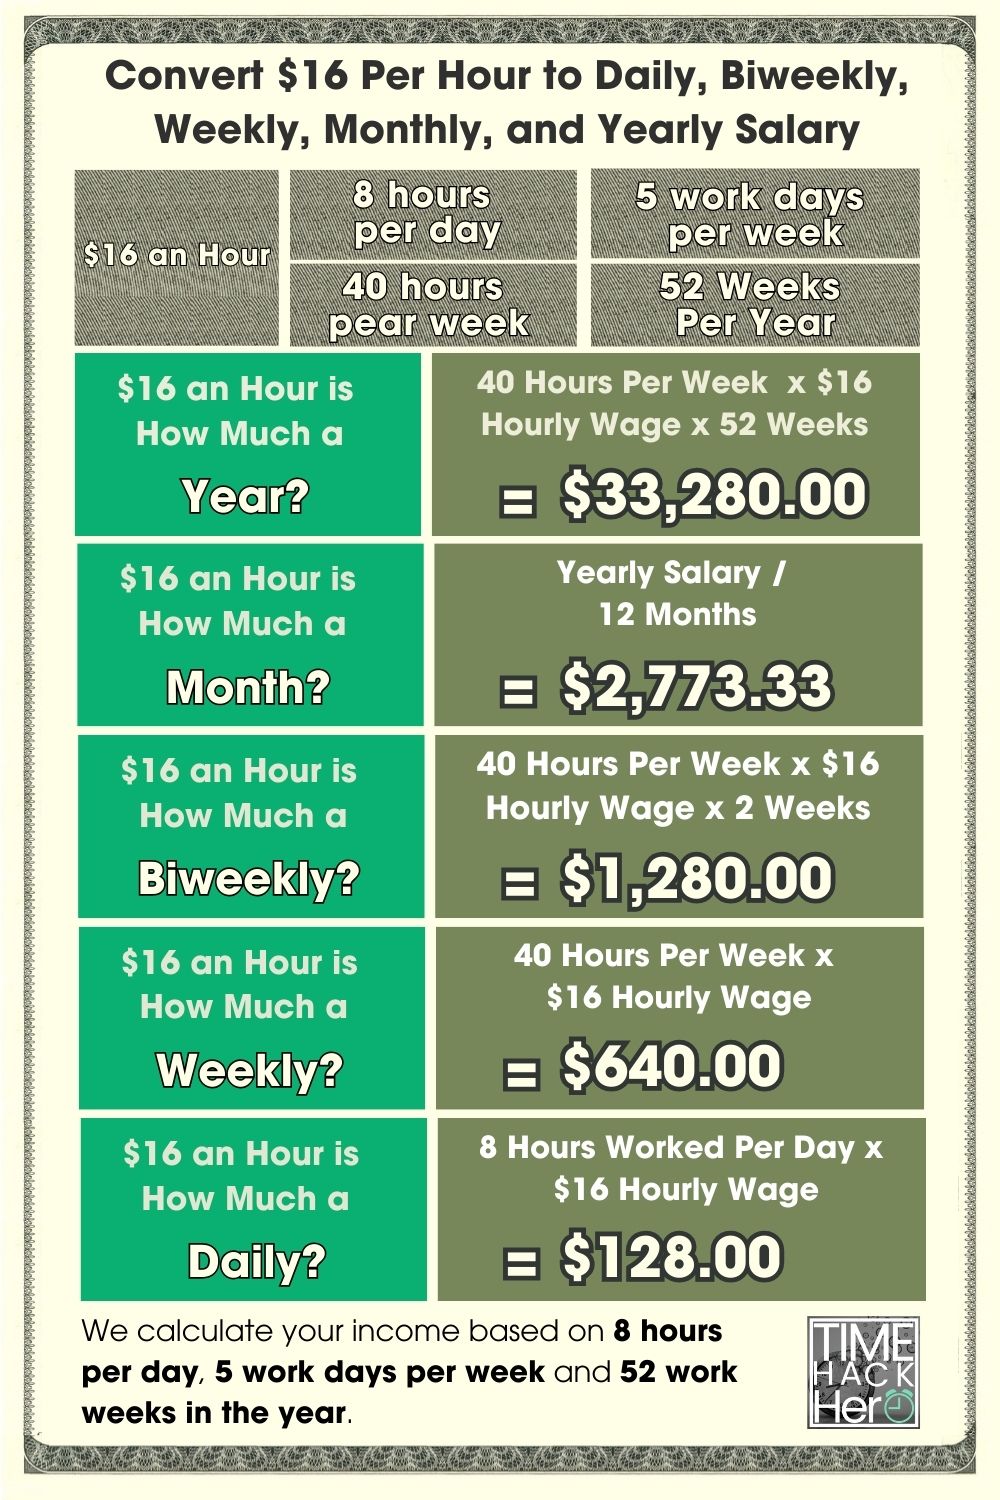 Convert $16 Per Hour to Daily, Biweekly, Weekly, Monthly, and Yearly Salary